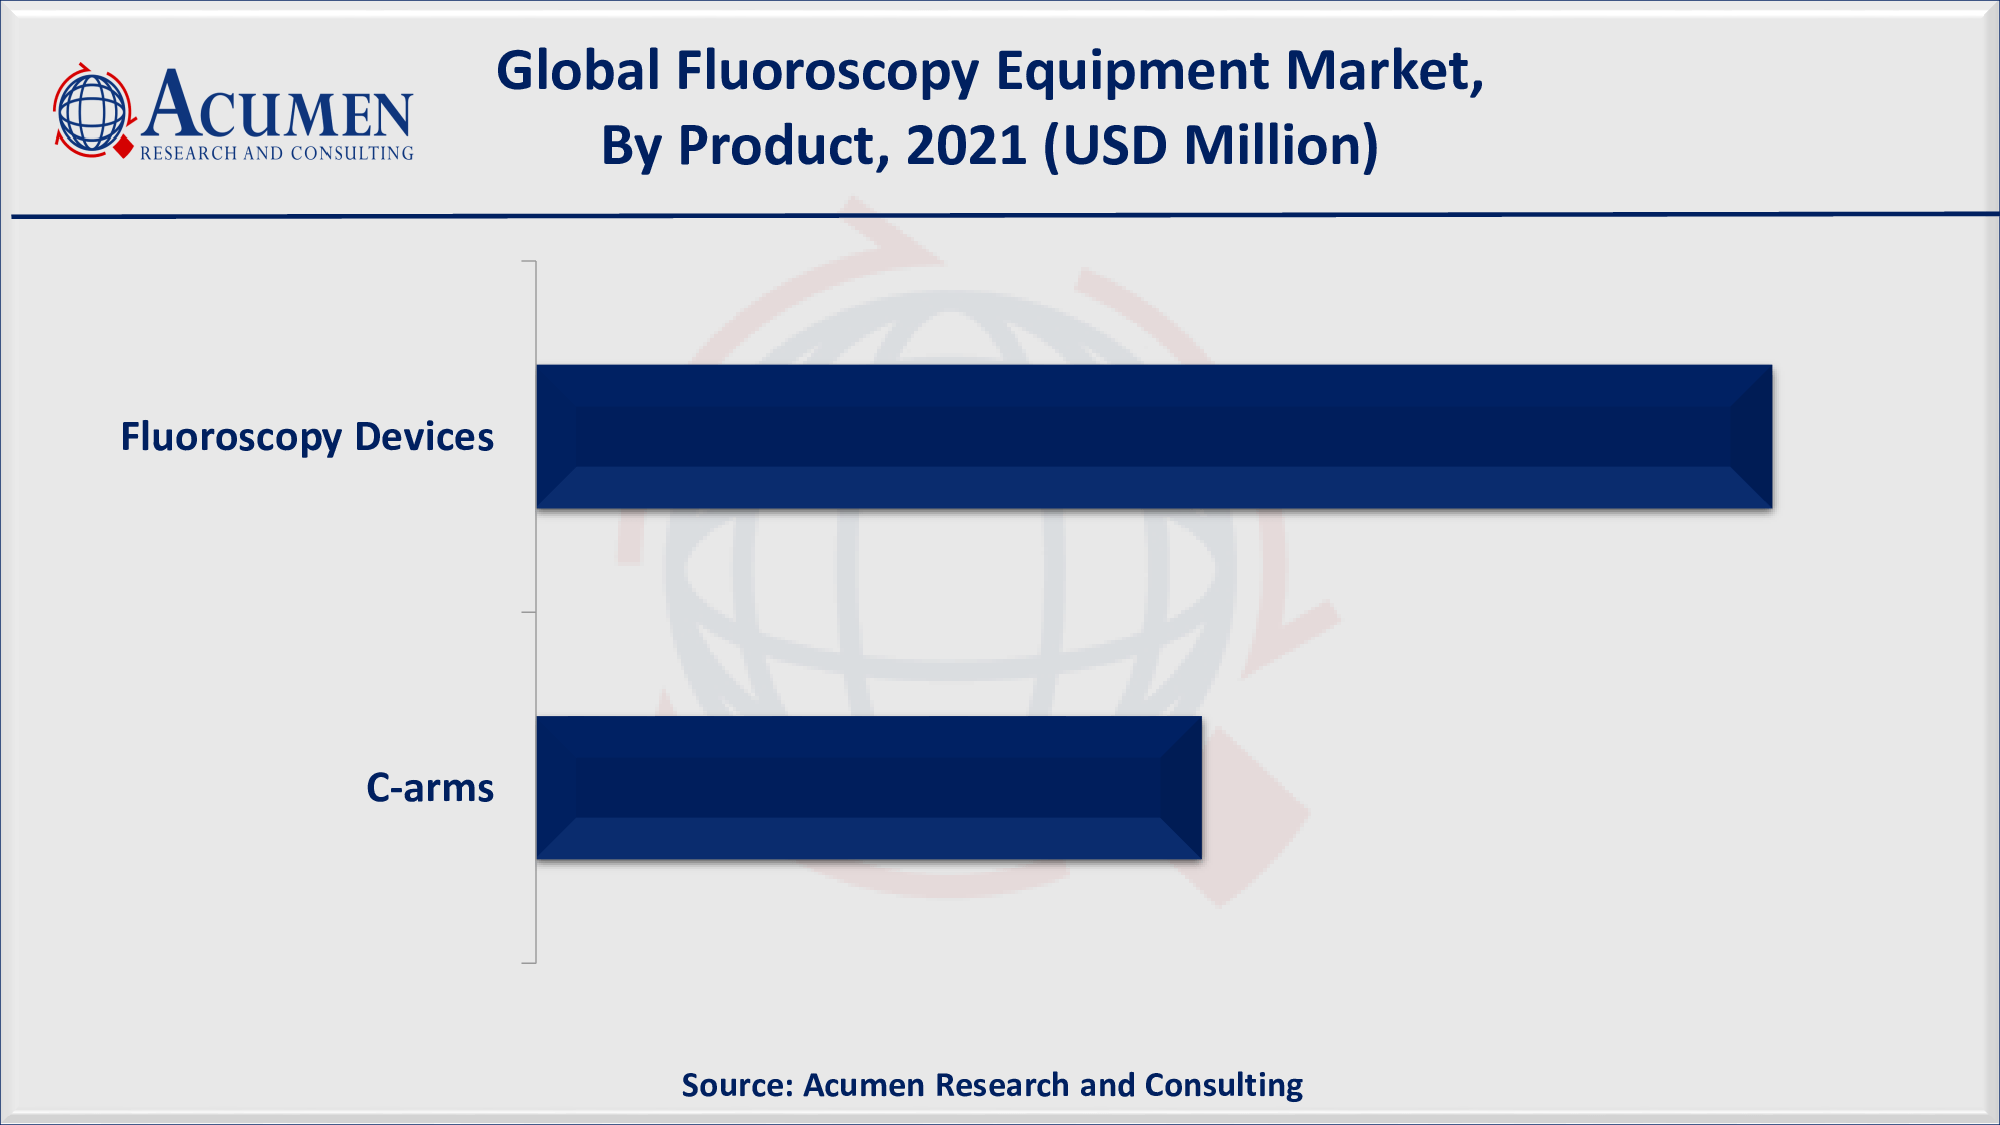 Fluoroscopy Equipment Market to 2030 - Forecast and Competitive Analysis